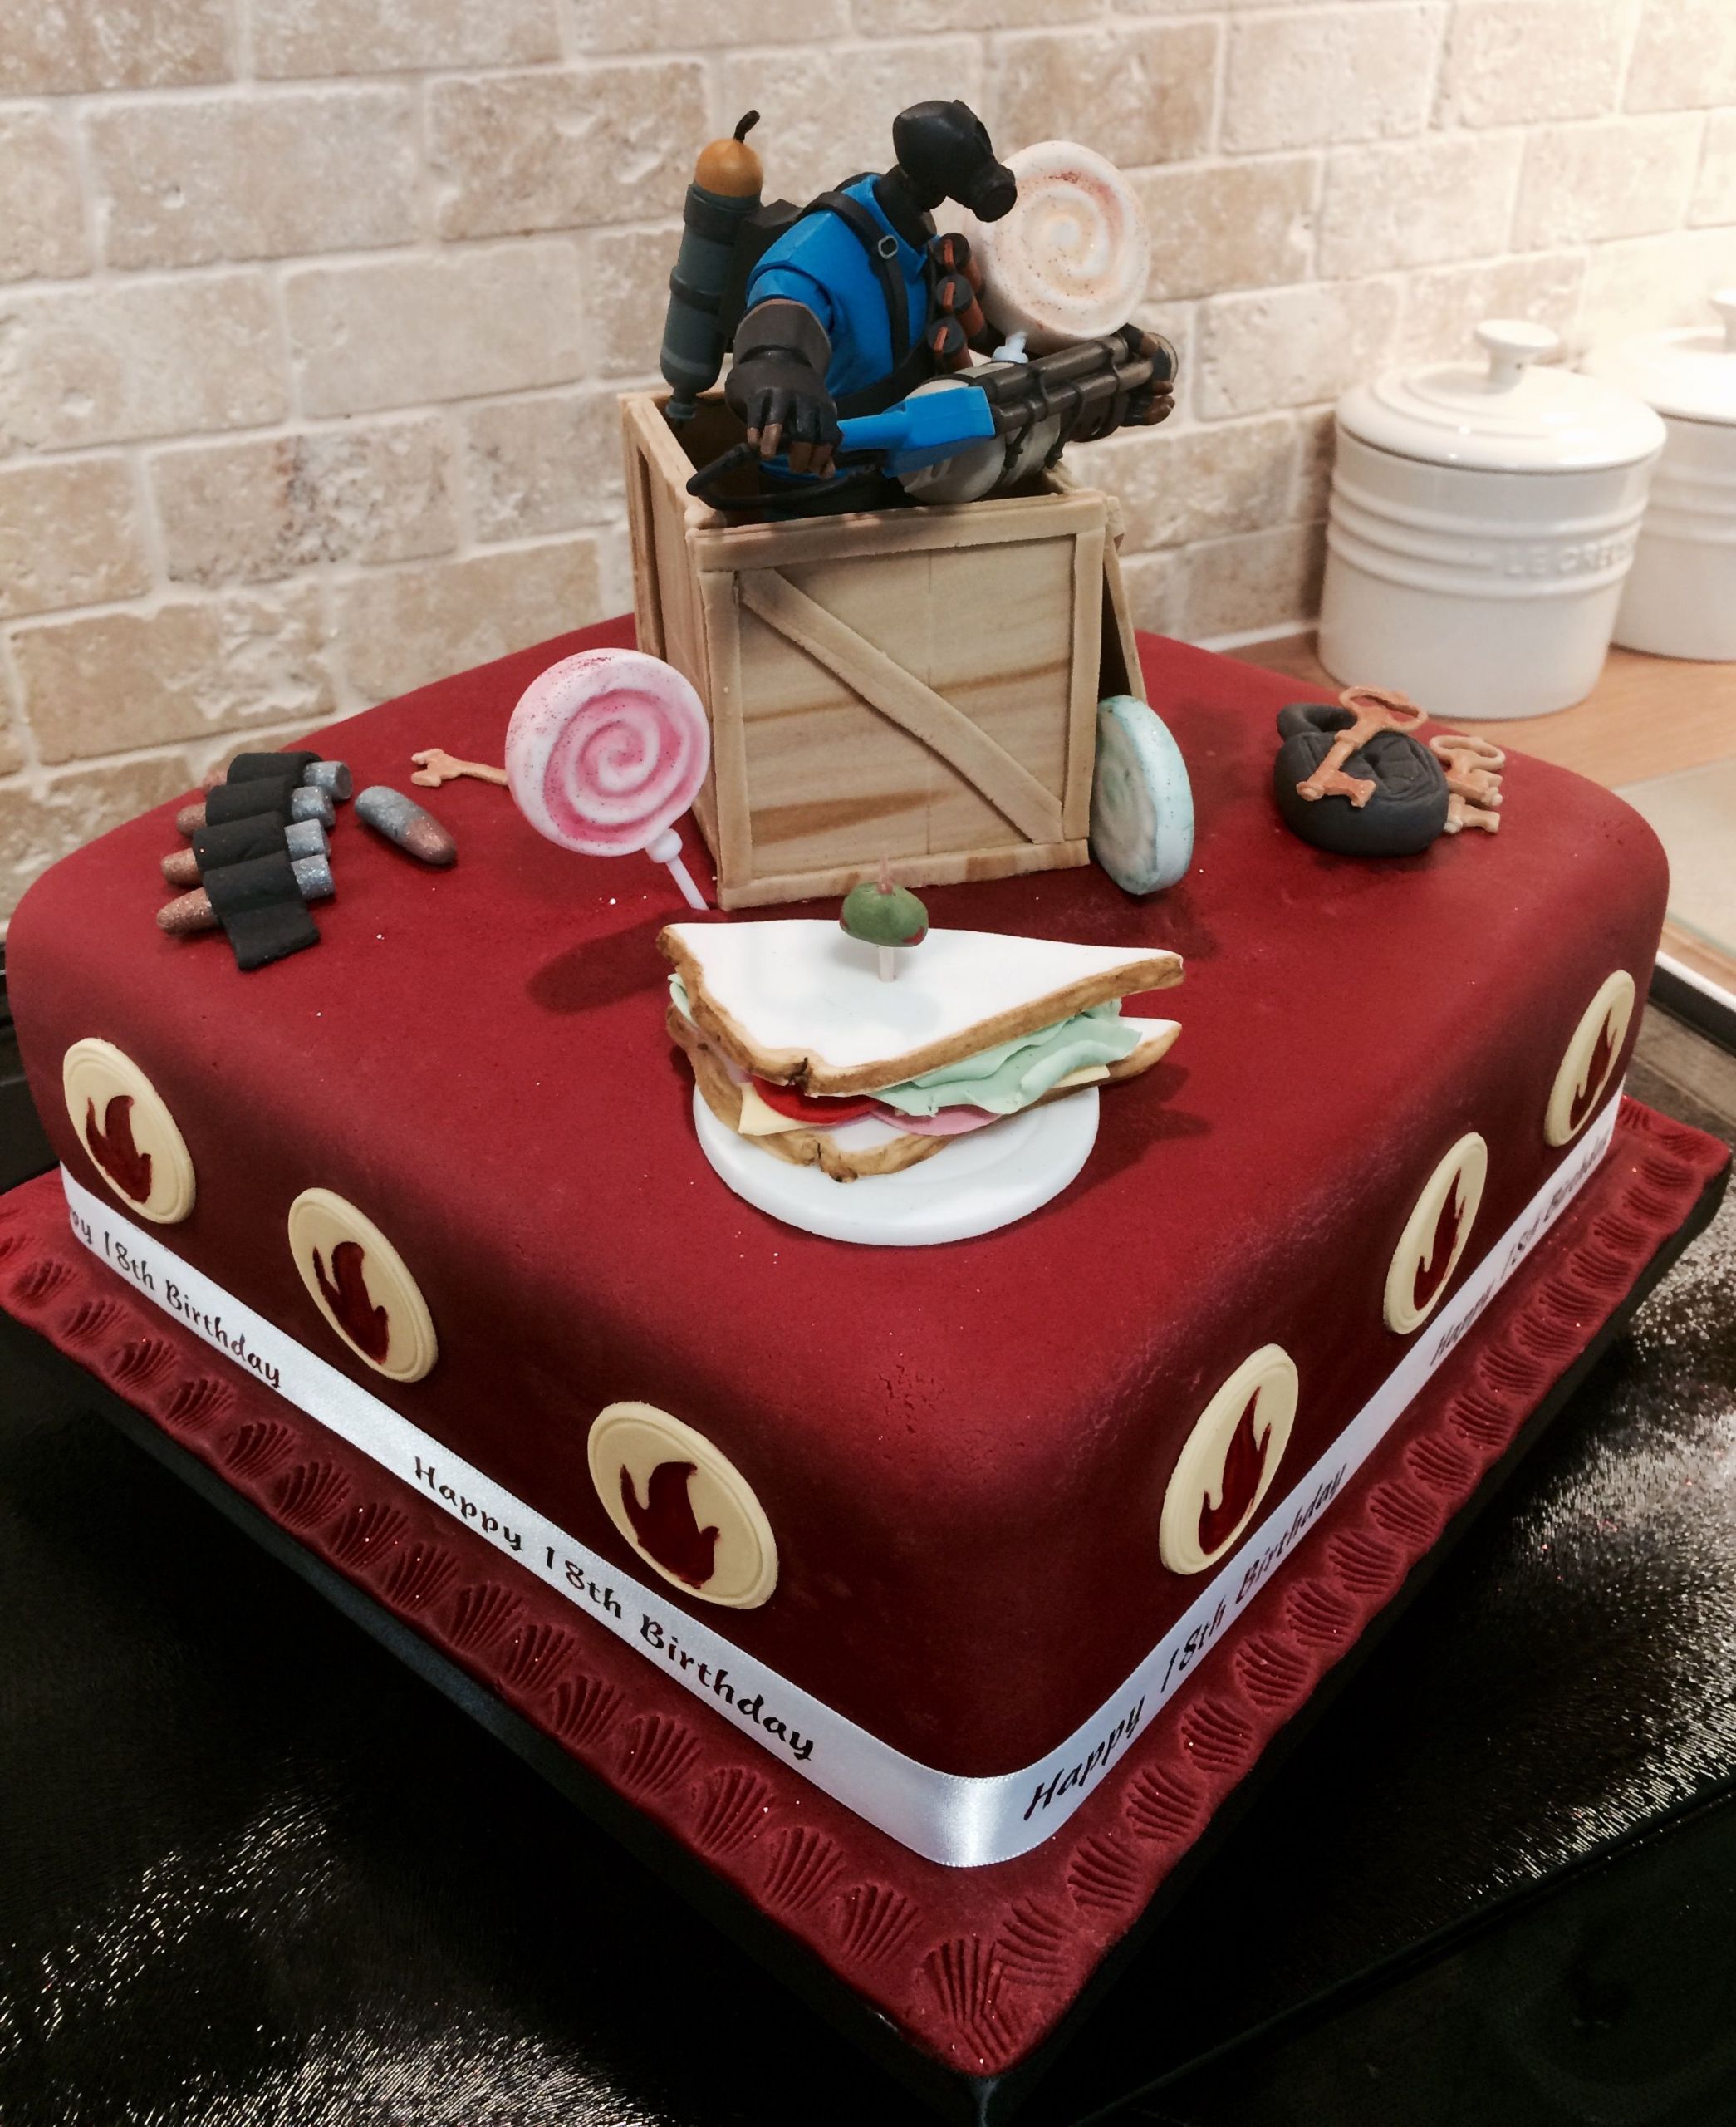 Team Fortress 2 Birthday Party Ideas
 Pyro Team Fortress 2 Our Creations in 2019